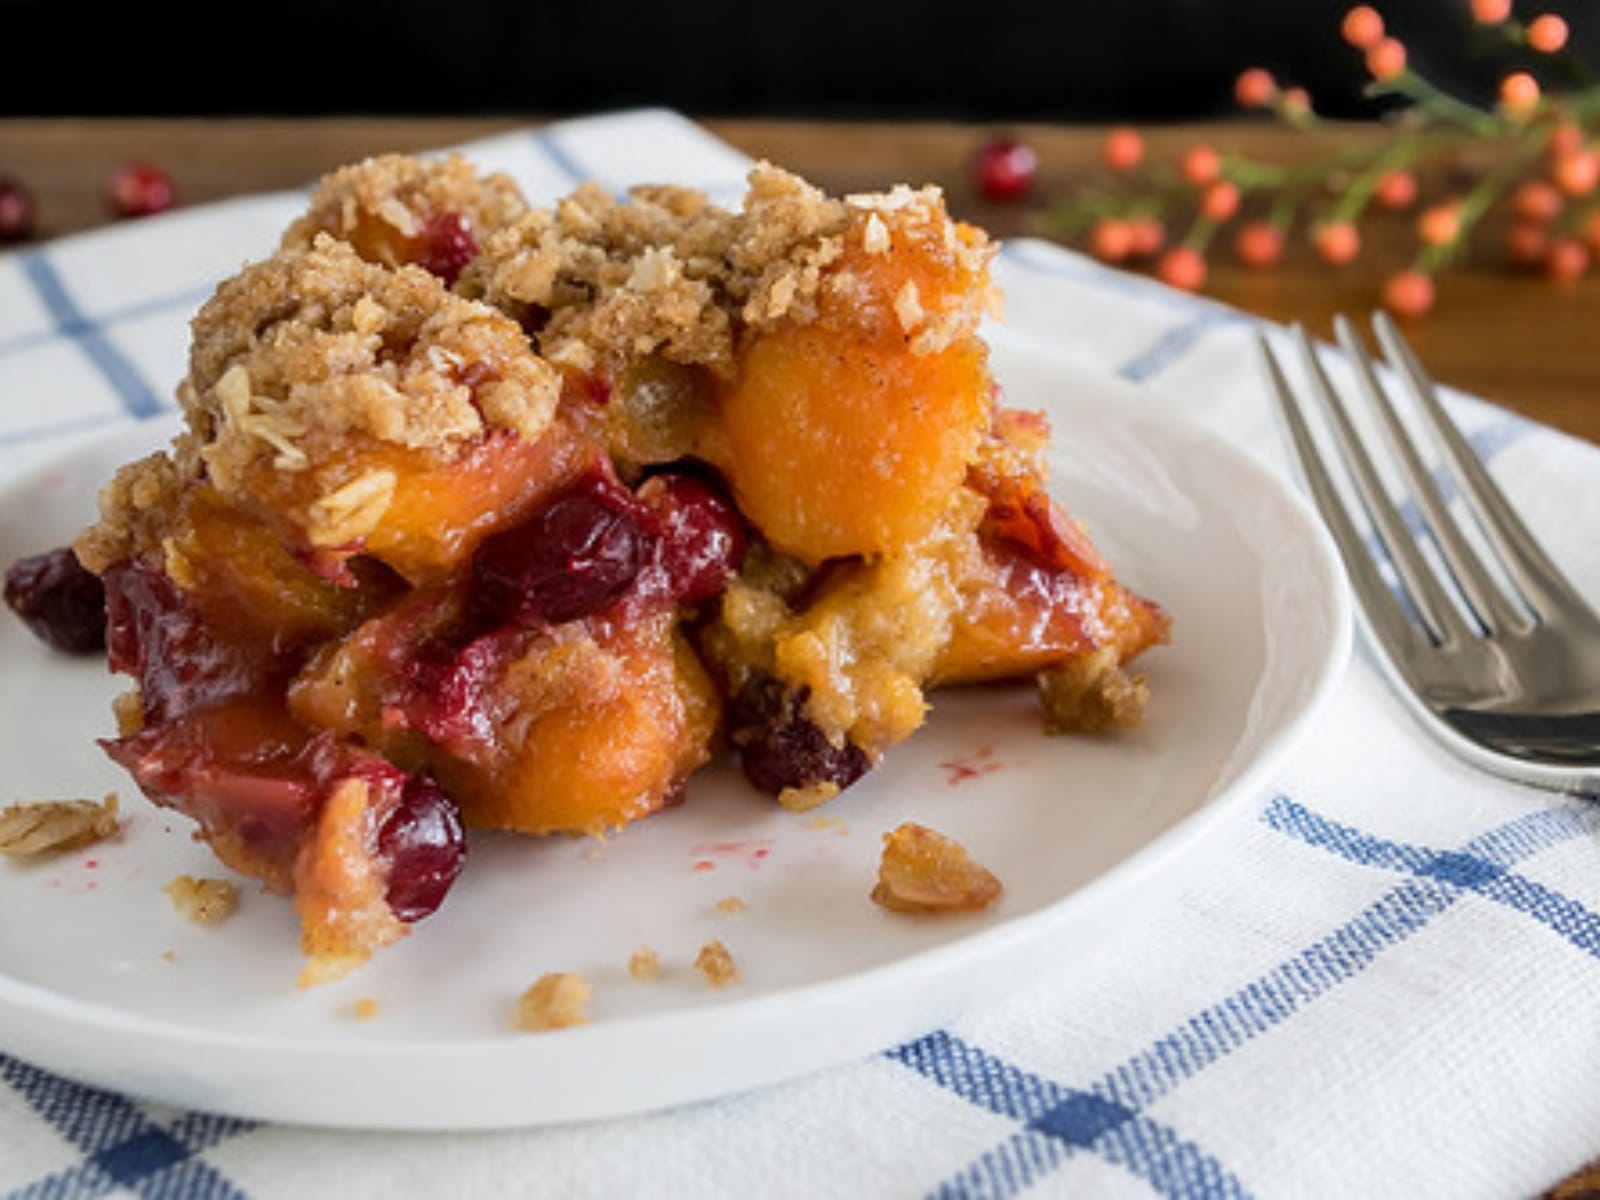 Baked Sweet Potatoes and Cranberries With Cinnamon Oat Crumble